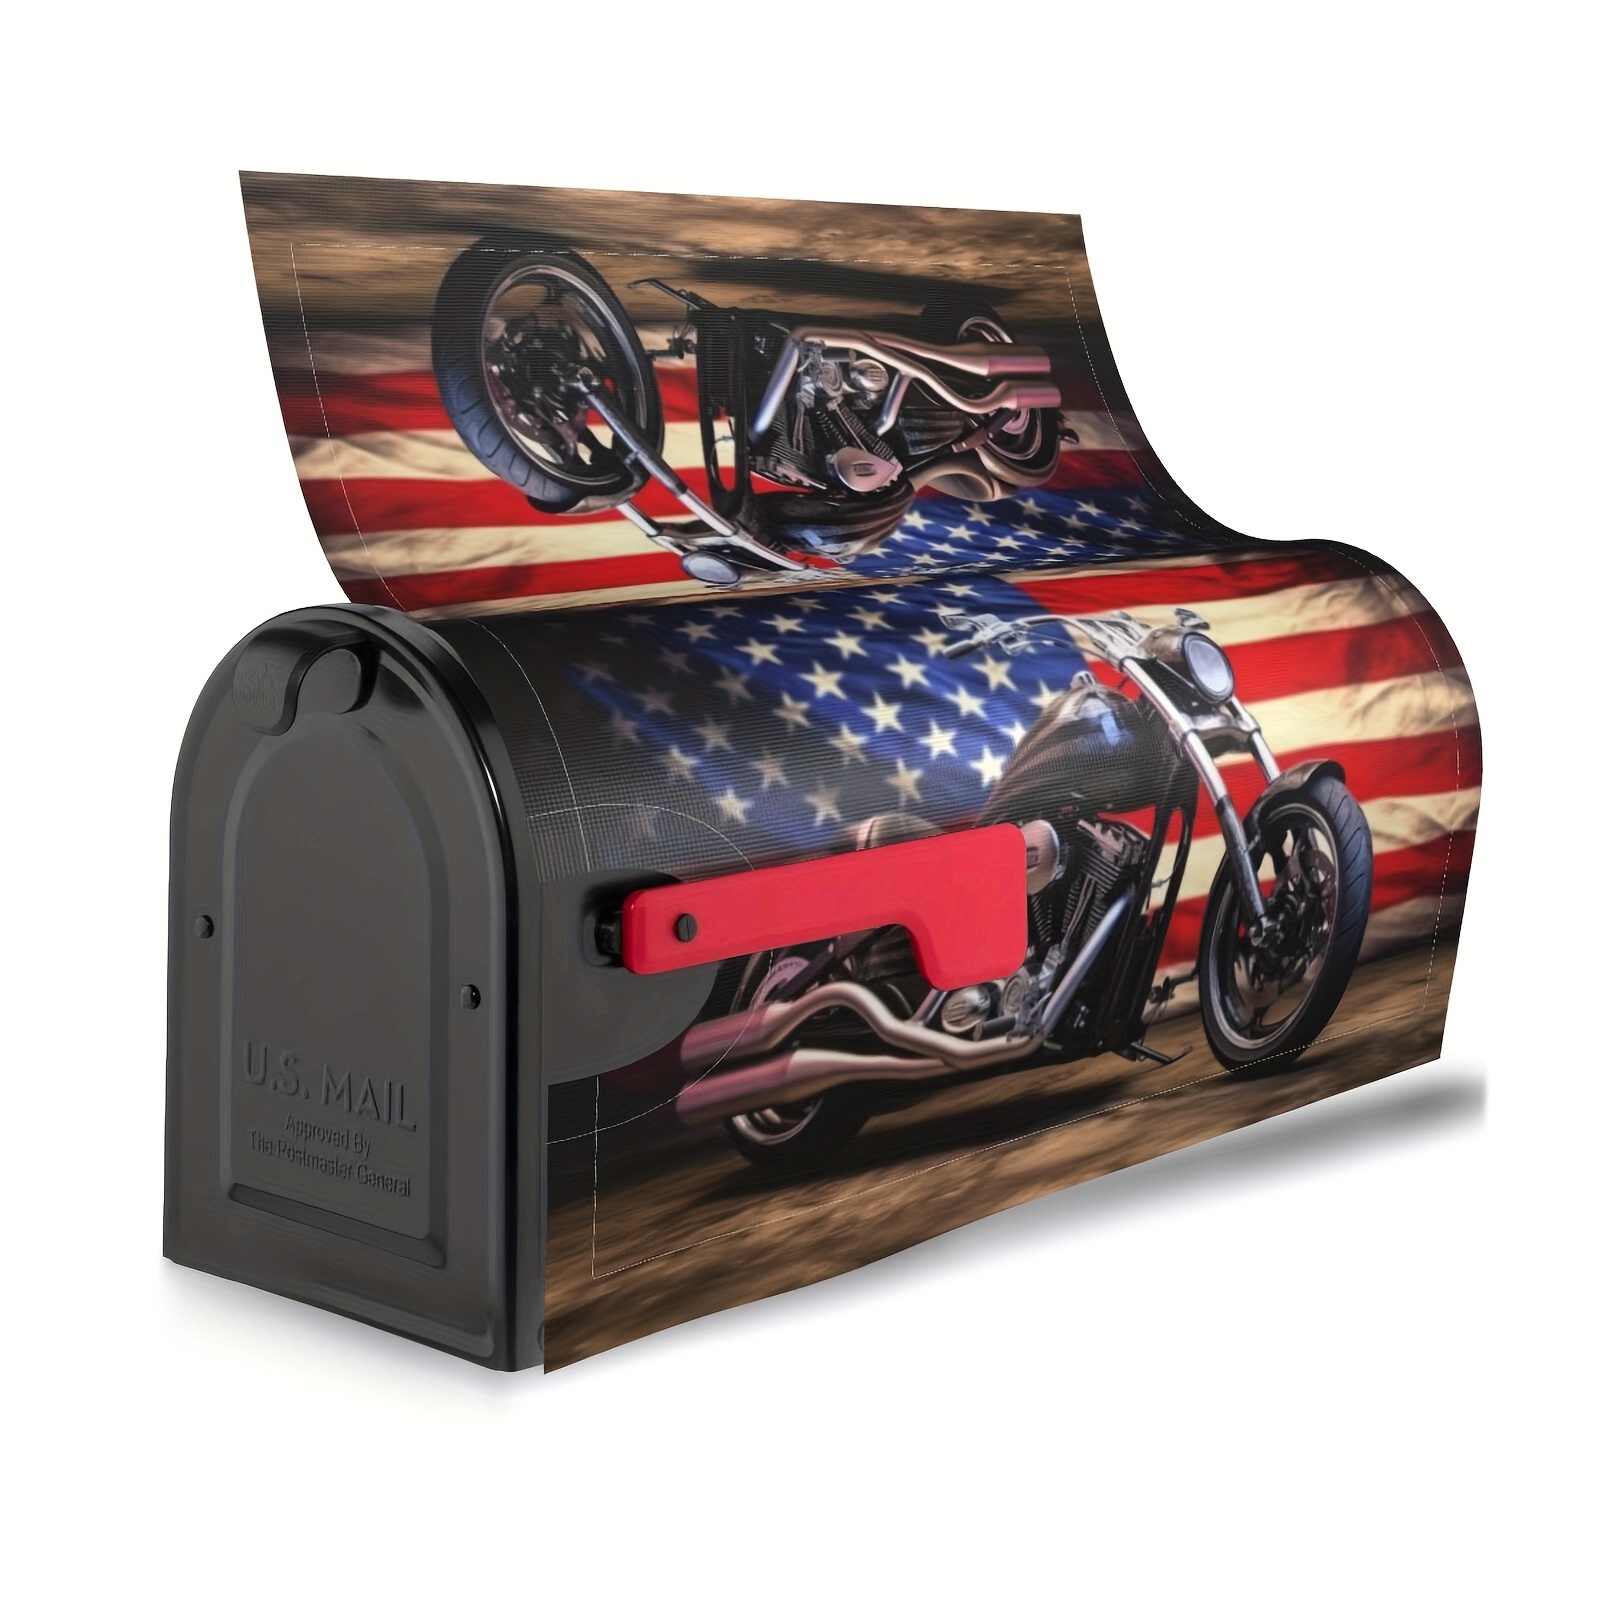 

1pc Motorcycle With American Flag Background Mailbox Cover, Patriotic 4th Of July Mailbox Cover, Wrapped Standard For Standard Mailboxes, Standard Size 21" X 18" Inch And 25.5"x21" Inch Outside